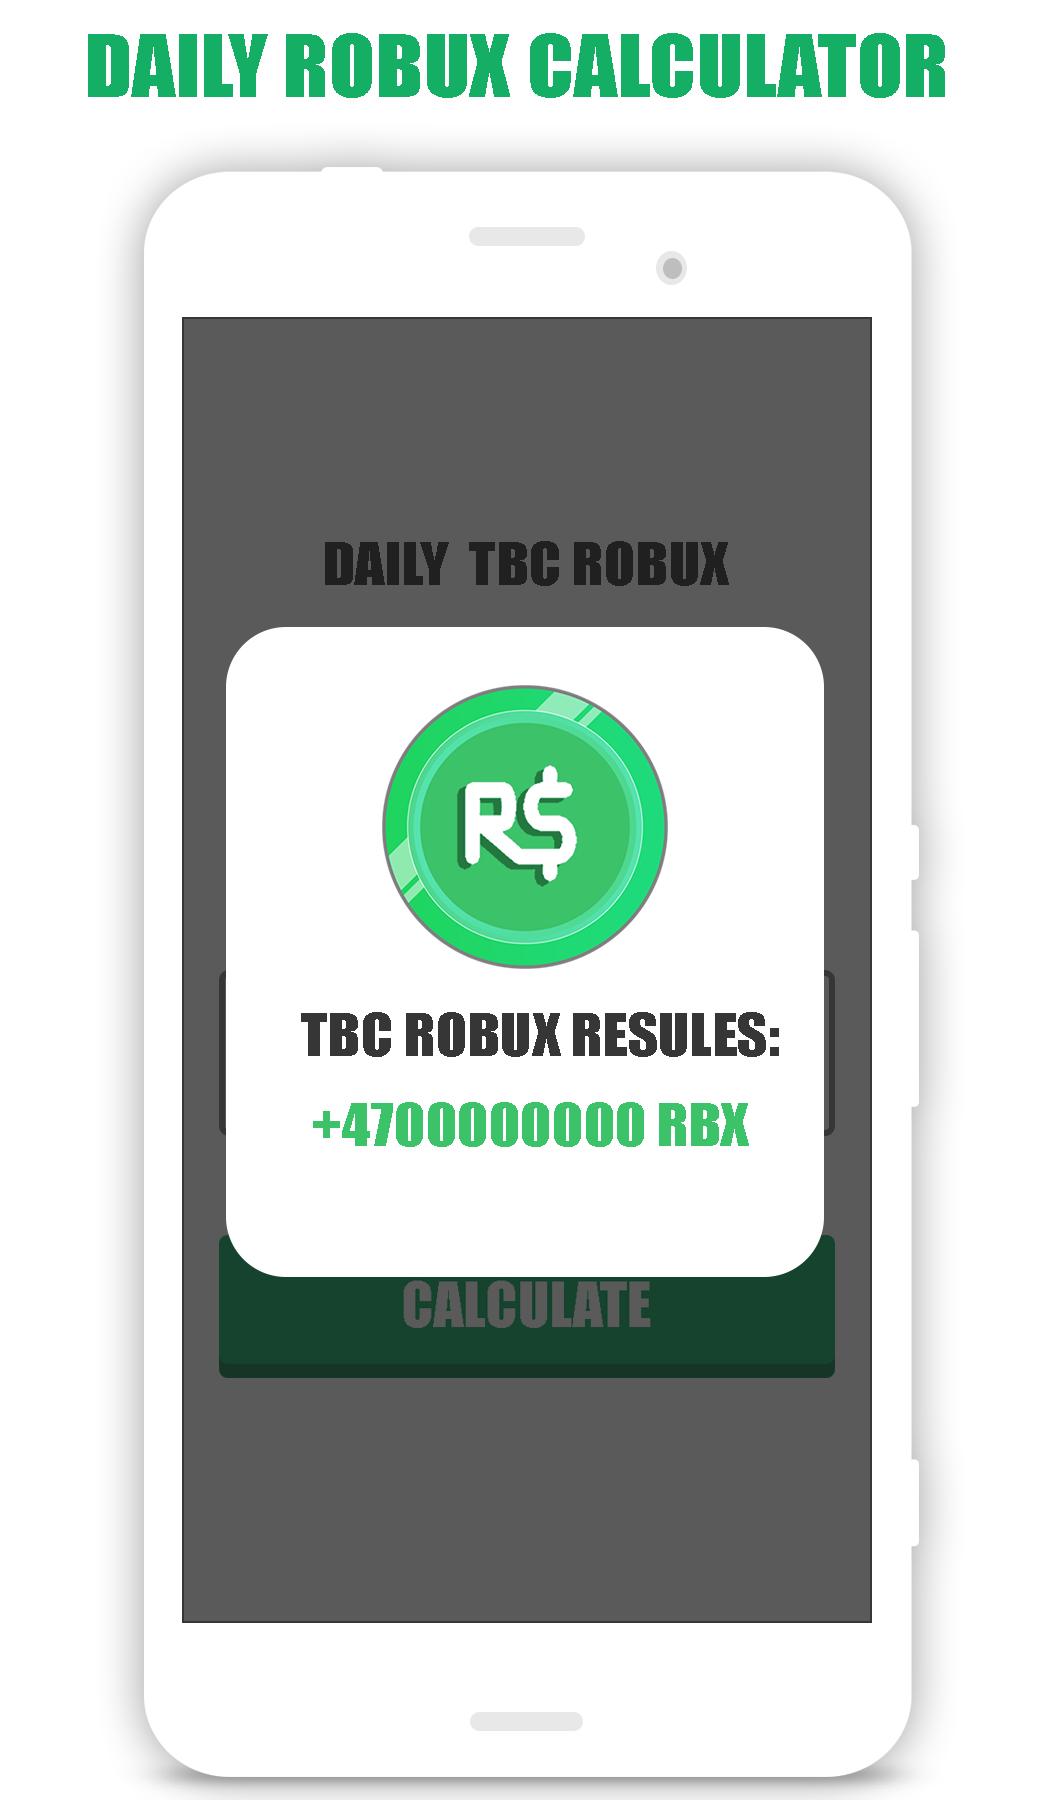 Free Robux Calculator For Roblox For Android Apk Download - free daily robux rbx calculator for android apk download